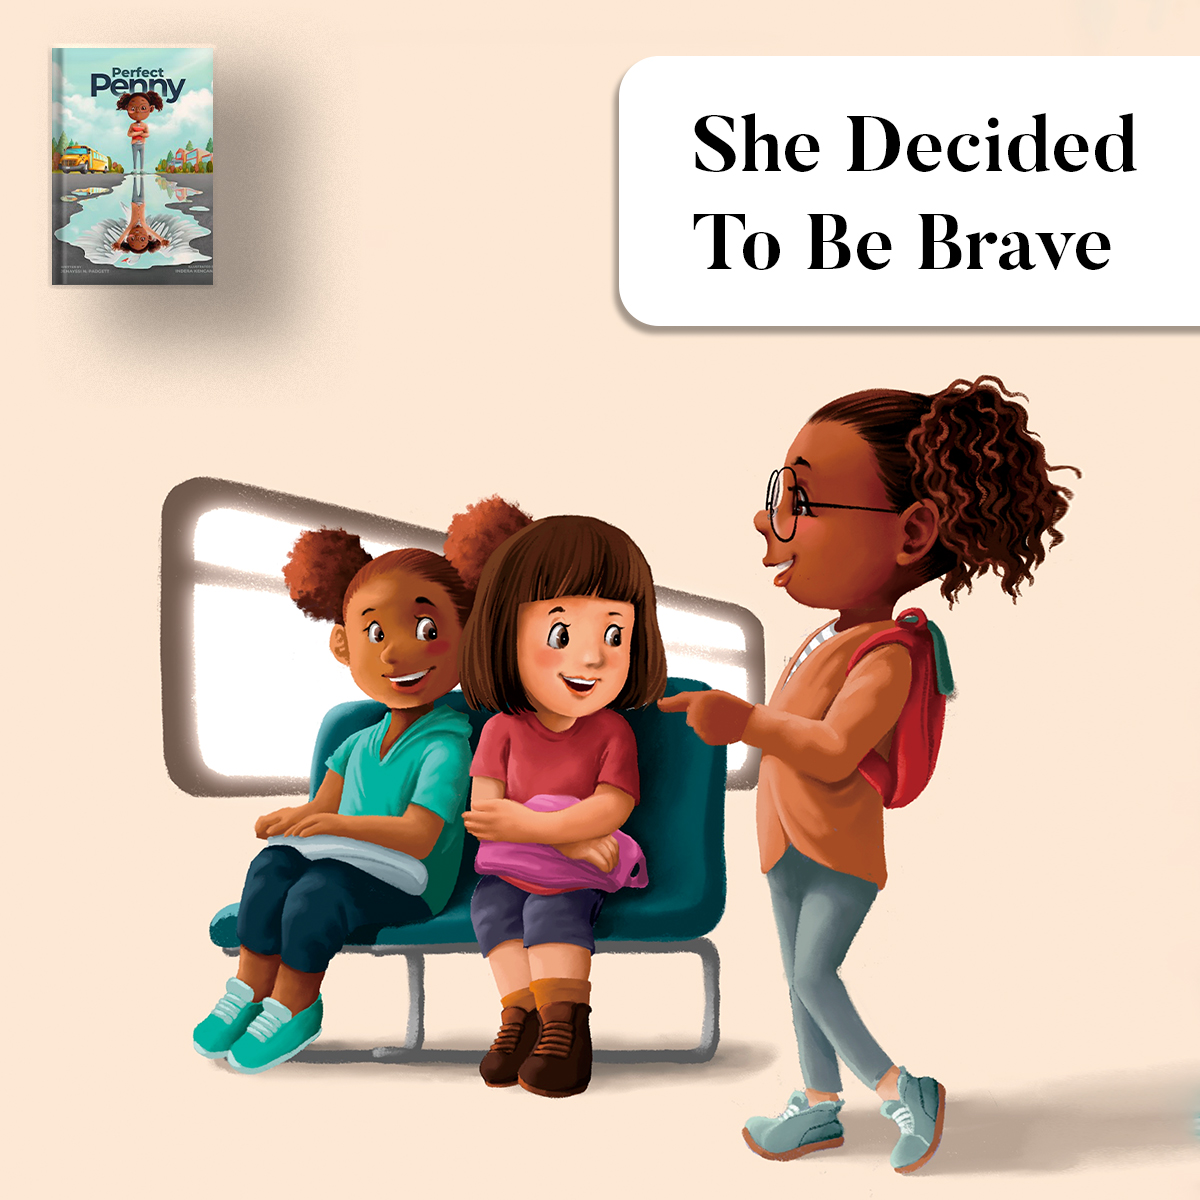 By the end of the day, Penny felt full of courage on the school bus, too, despite the challenges she had faced earlier in the day because she knew she could rely on her friends for support. perfectpennyseries.com #childrenbook #author #booklaunch #newbook #authorlife #readers